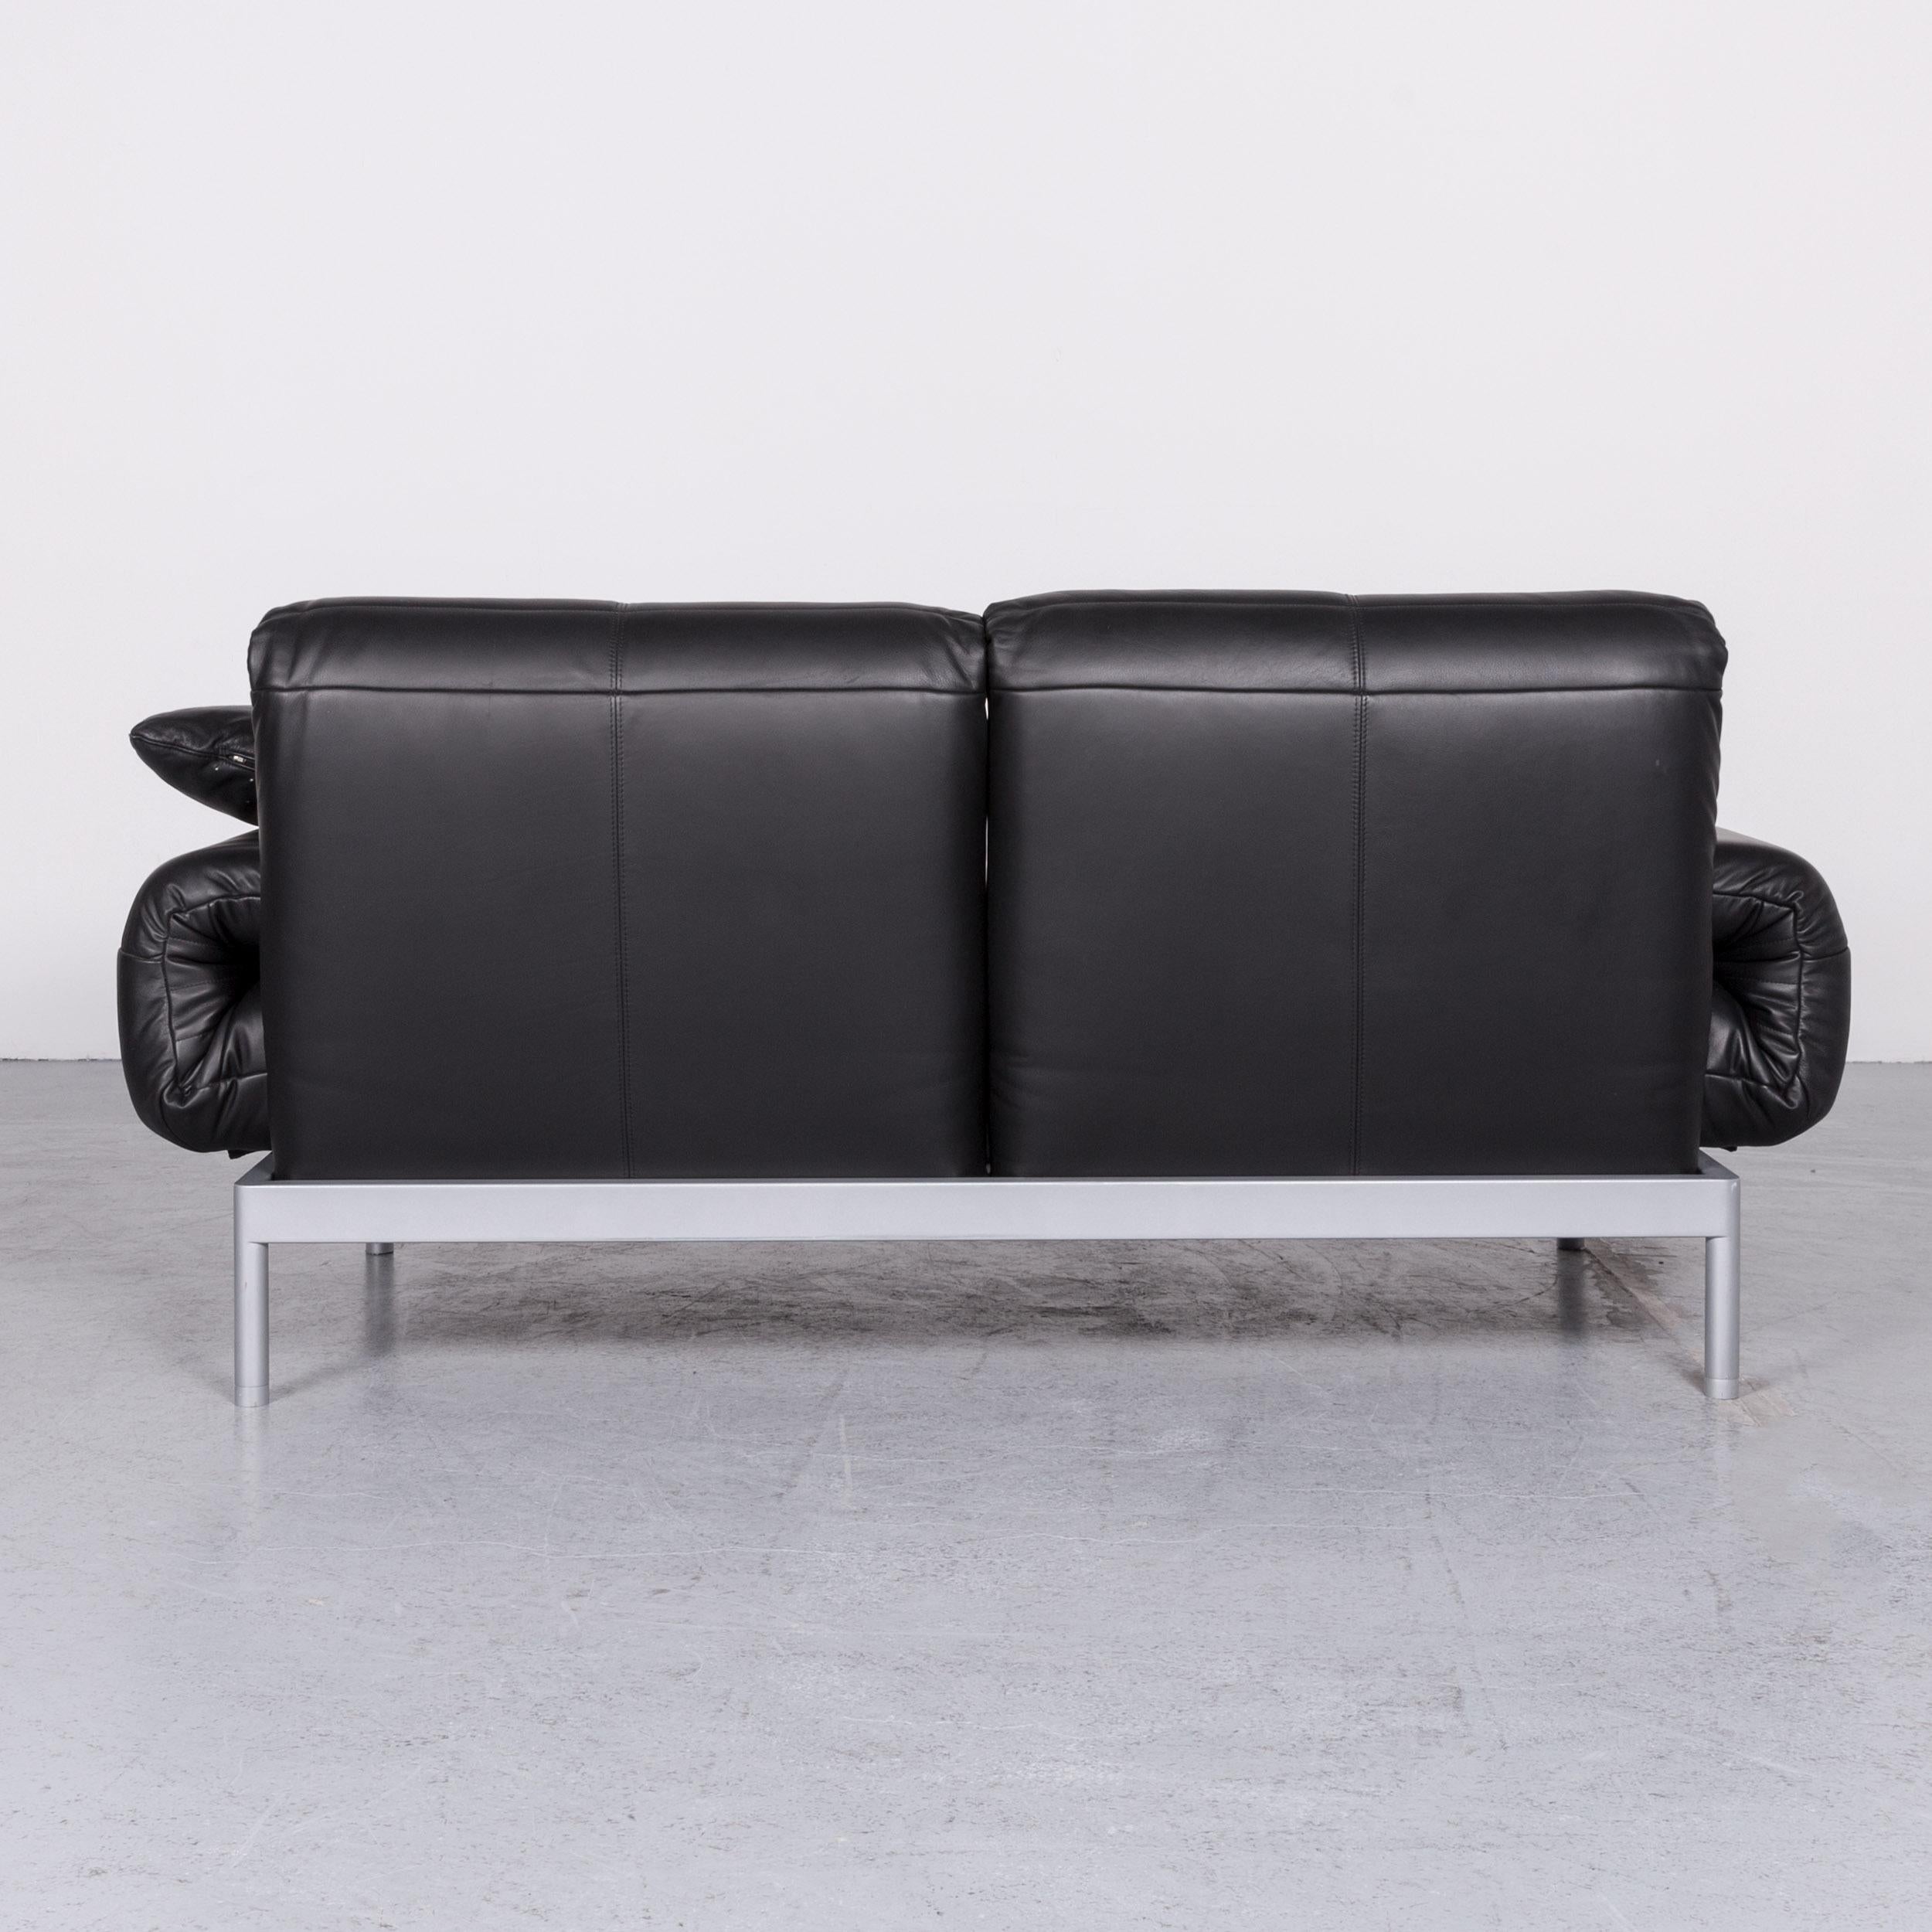 Rolf Benz Plura Designer Sofa Leather black Relax Function Couch Modern For Sale 4